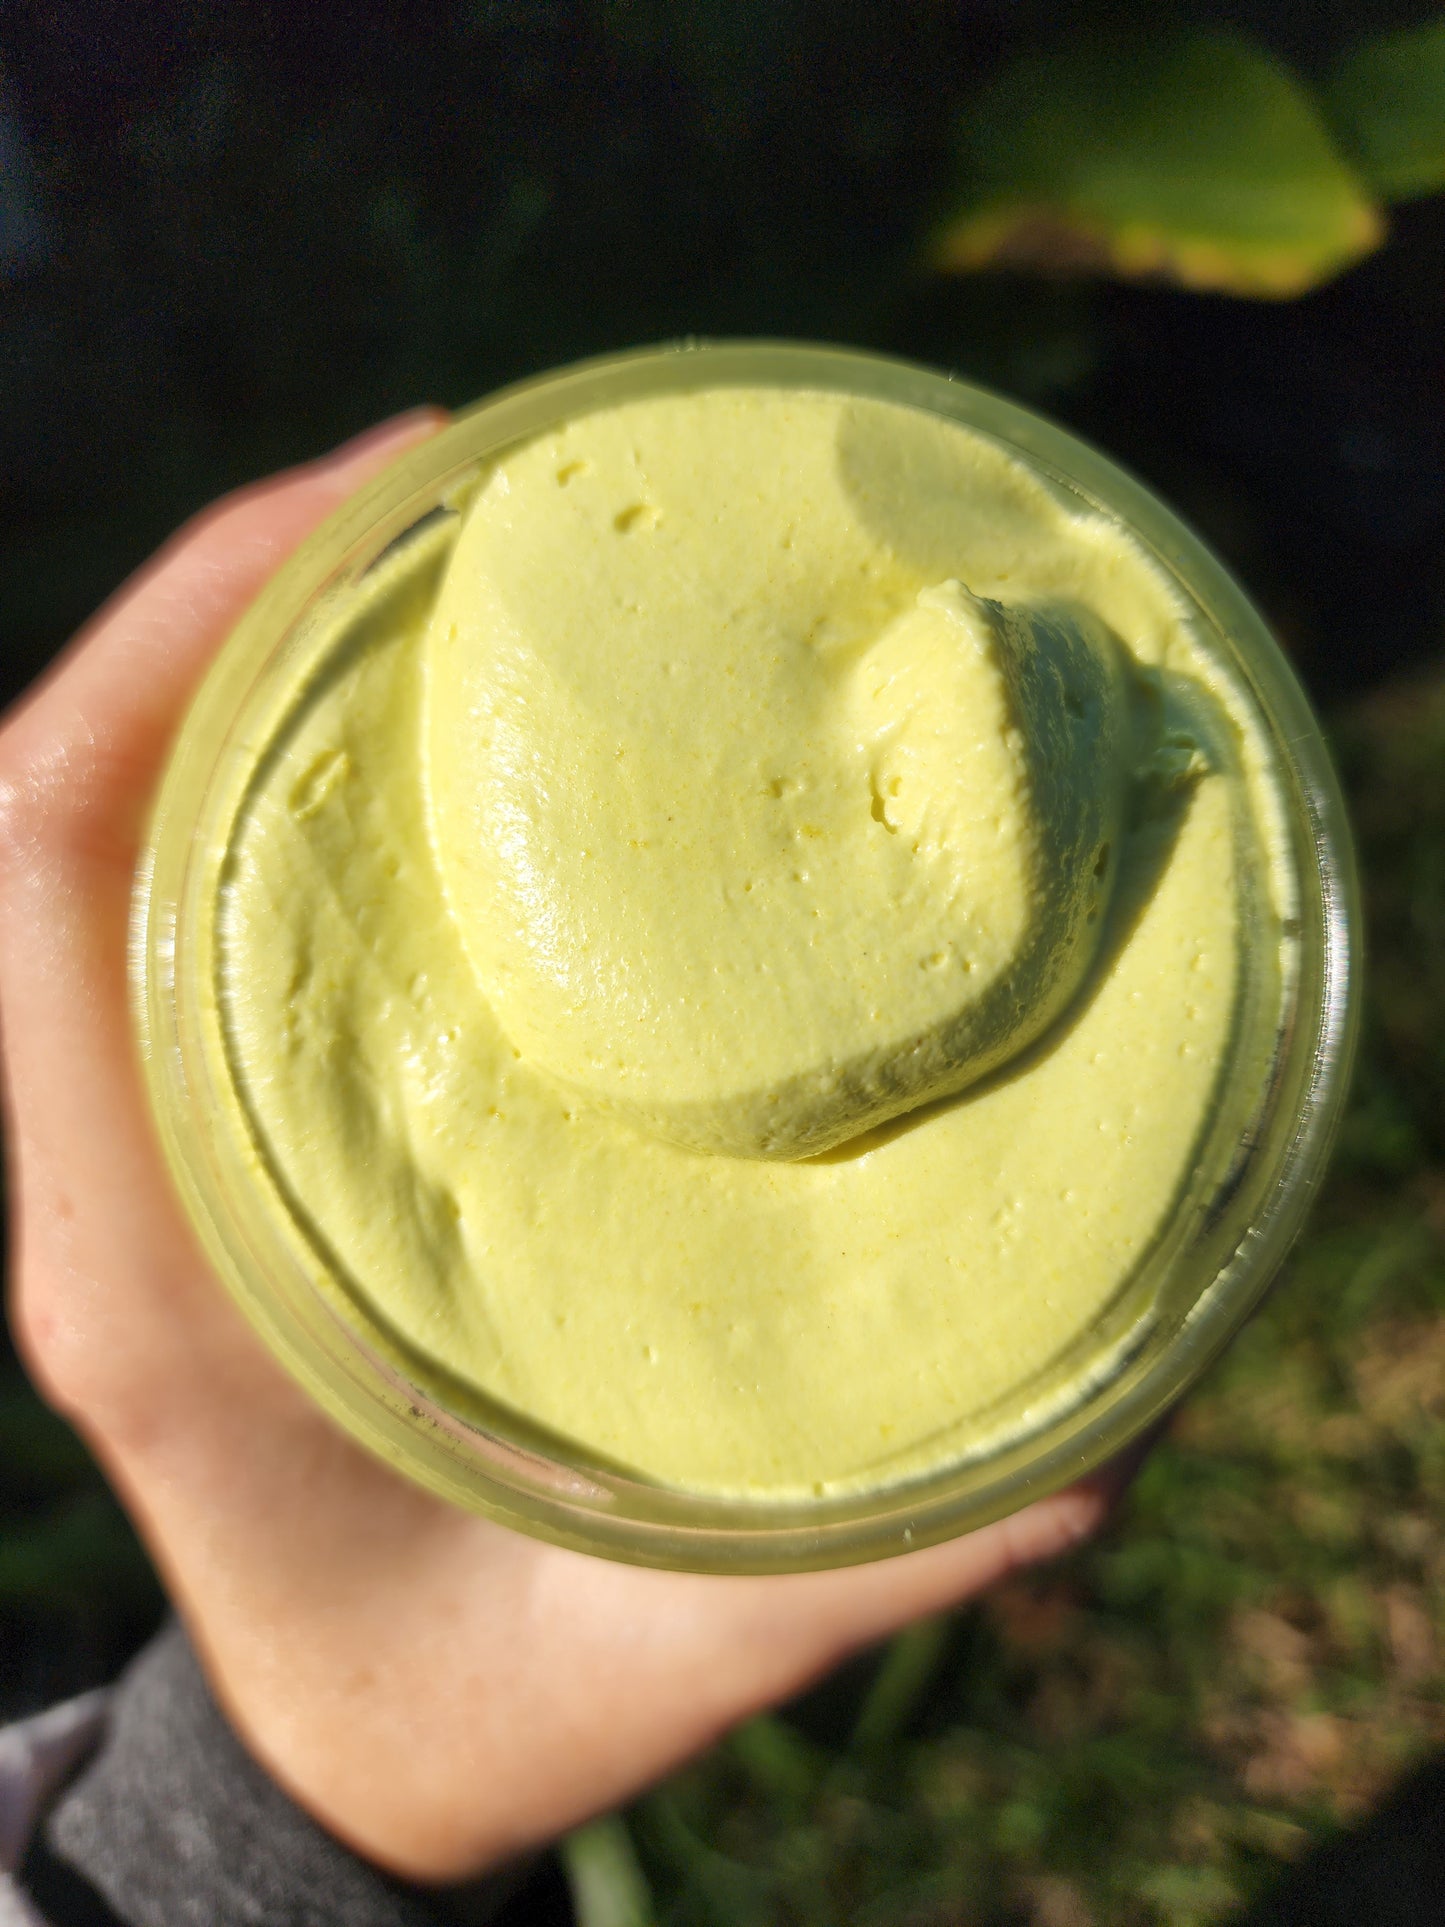 Whipped Body Butter made with Shea and Mango butters